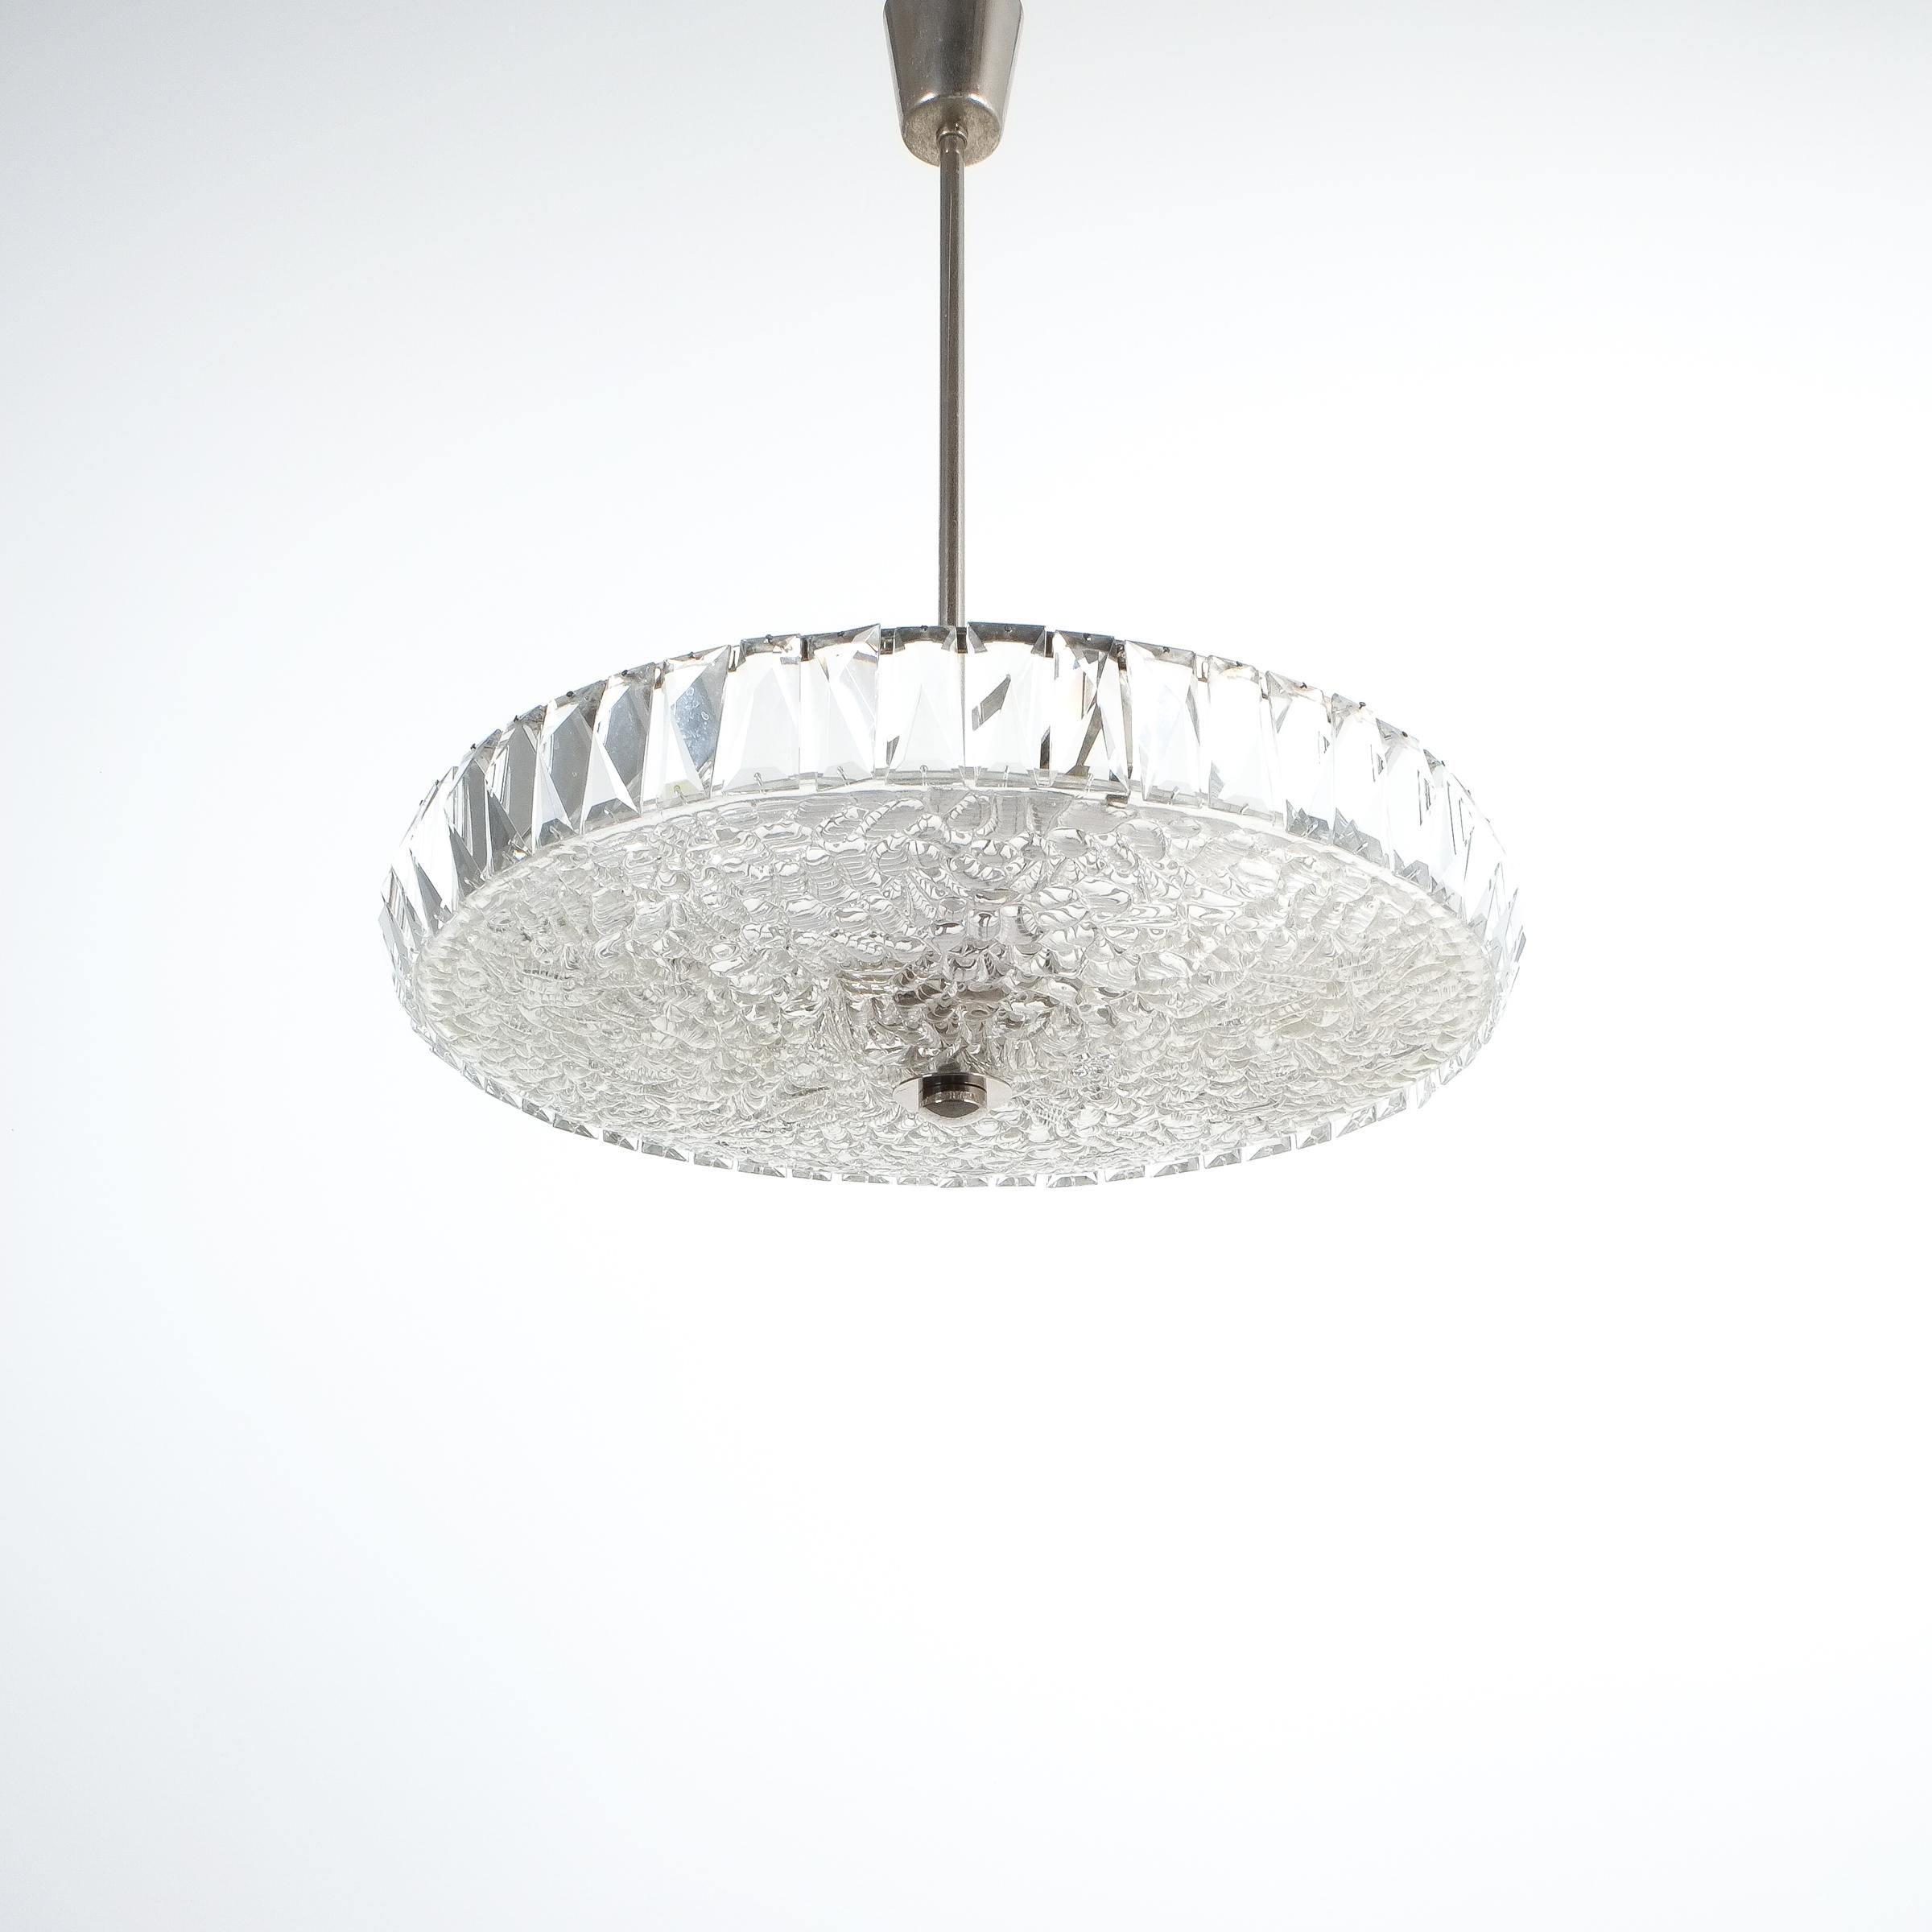 Bakalowits Dome Crystal Glass Chandelier, Austria, circa 1955 For Sale 2